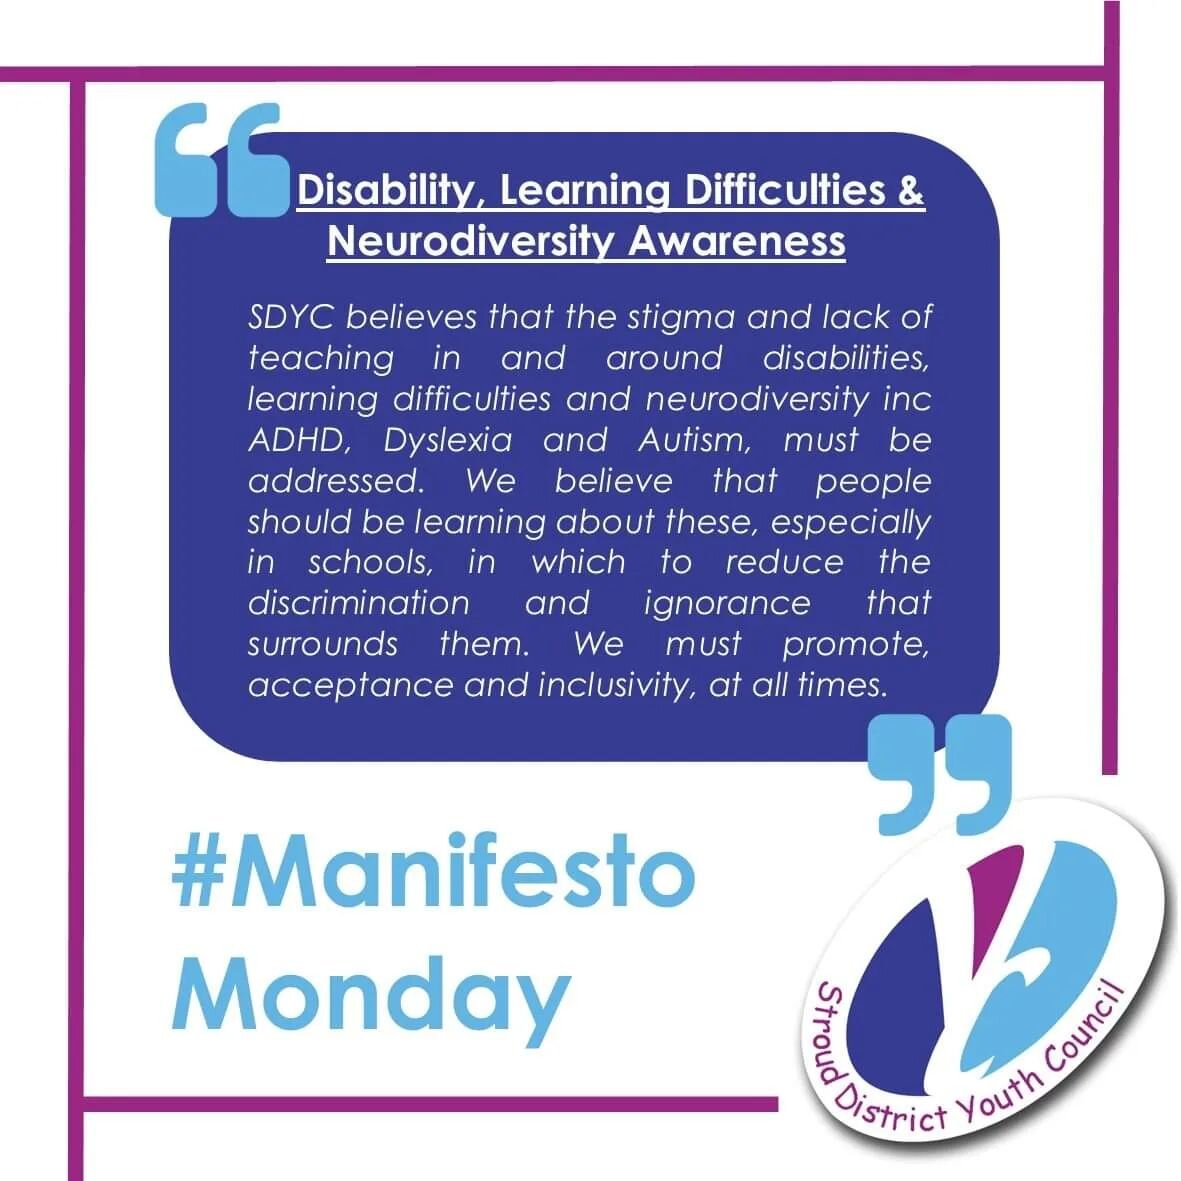 Our social media campaign series continues 😄: 

The #ManifestoMonday initiative will see us sharing one of SDYC's Manifesto statements each week - the series will reflect the diversity of SDYC's work &amp; the range of issues affecting young people.